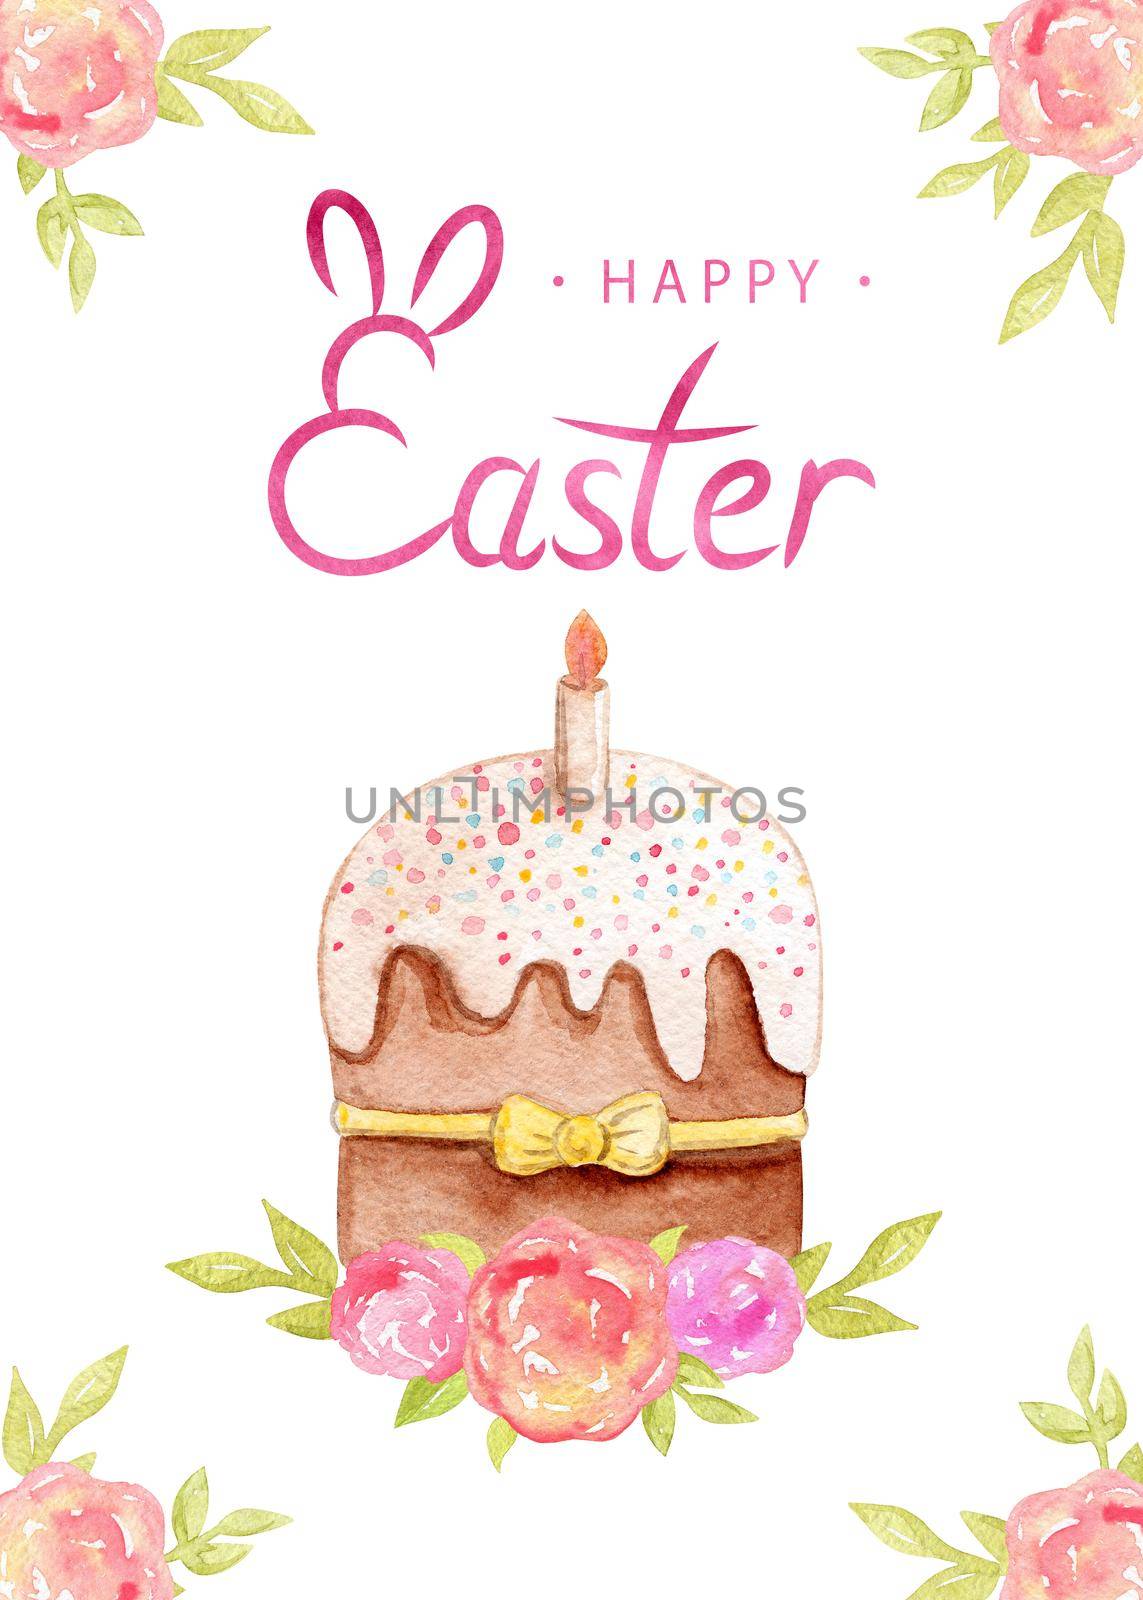 Watercolor happy easter card with cake and candle. Spring poster with pink flowers